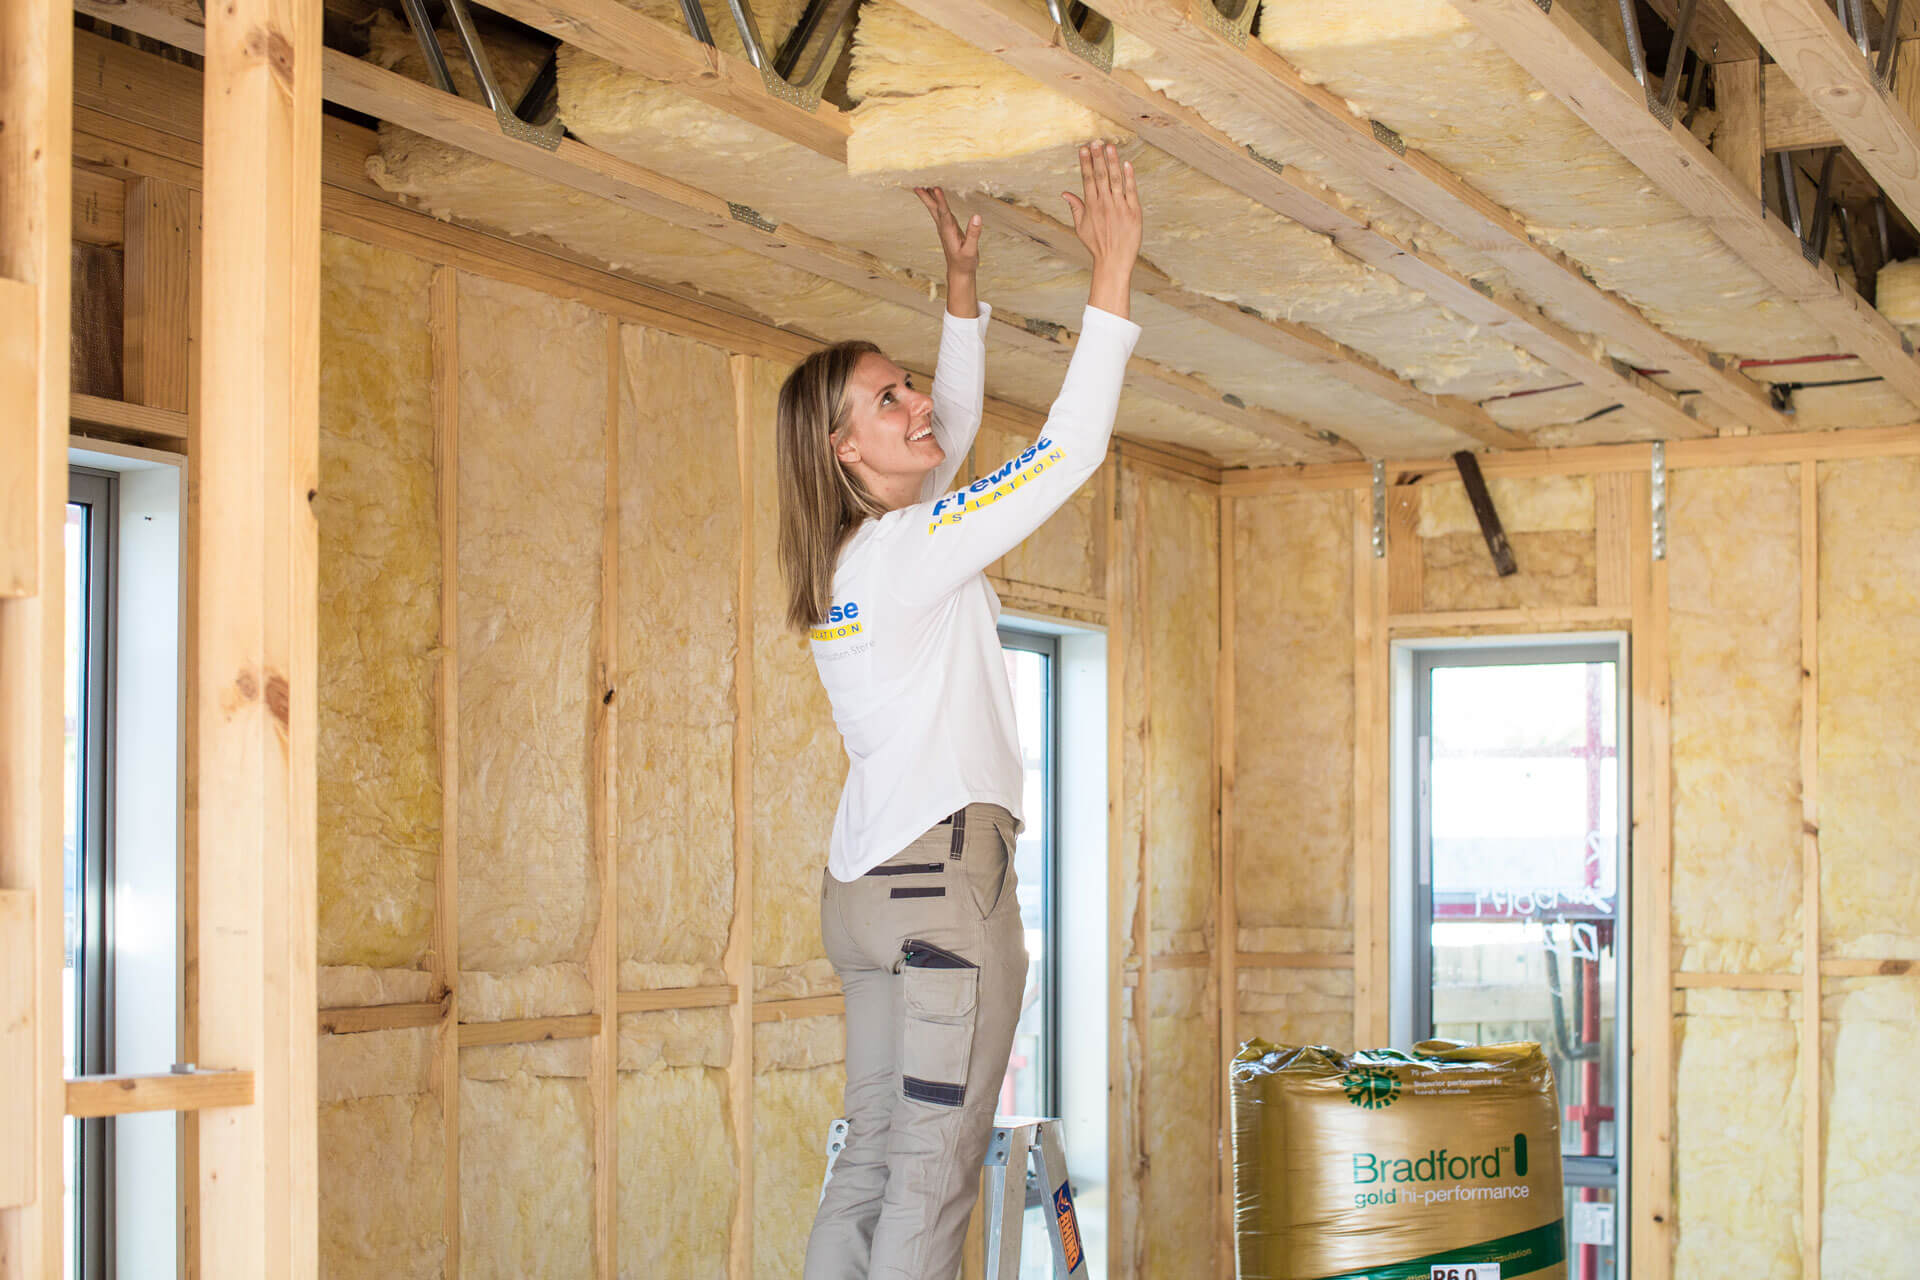 Buy R6.0 Ceiling Insulation Online